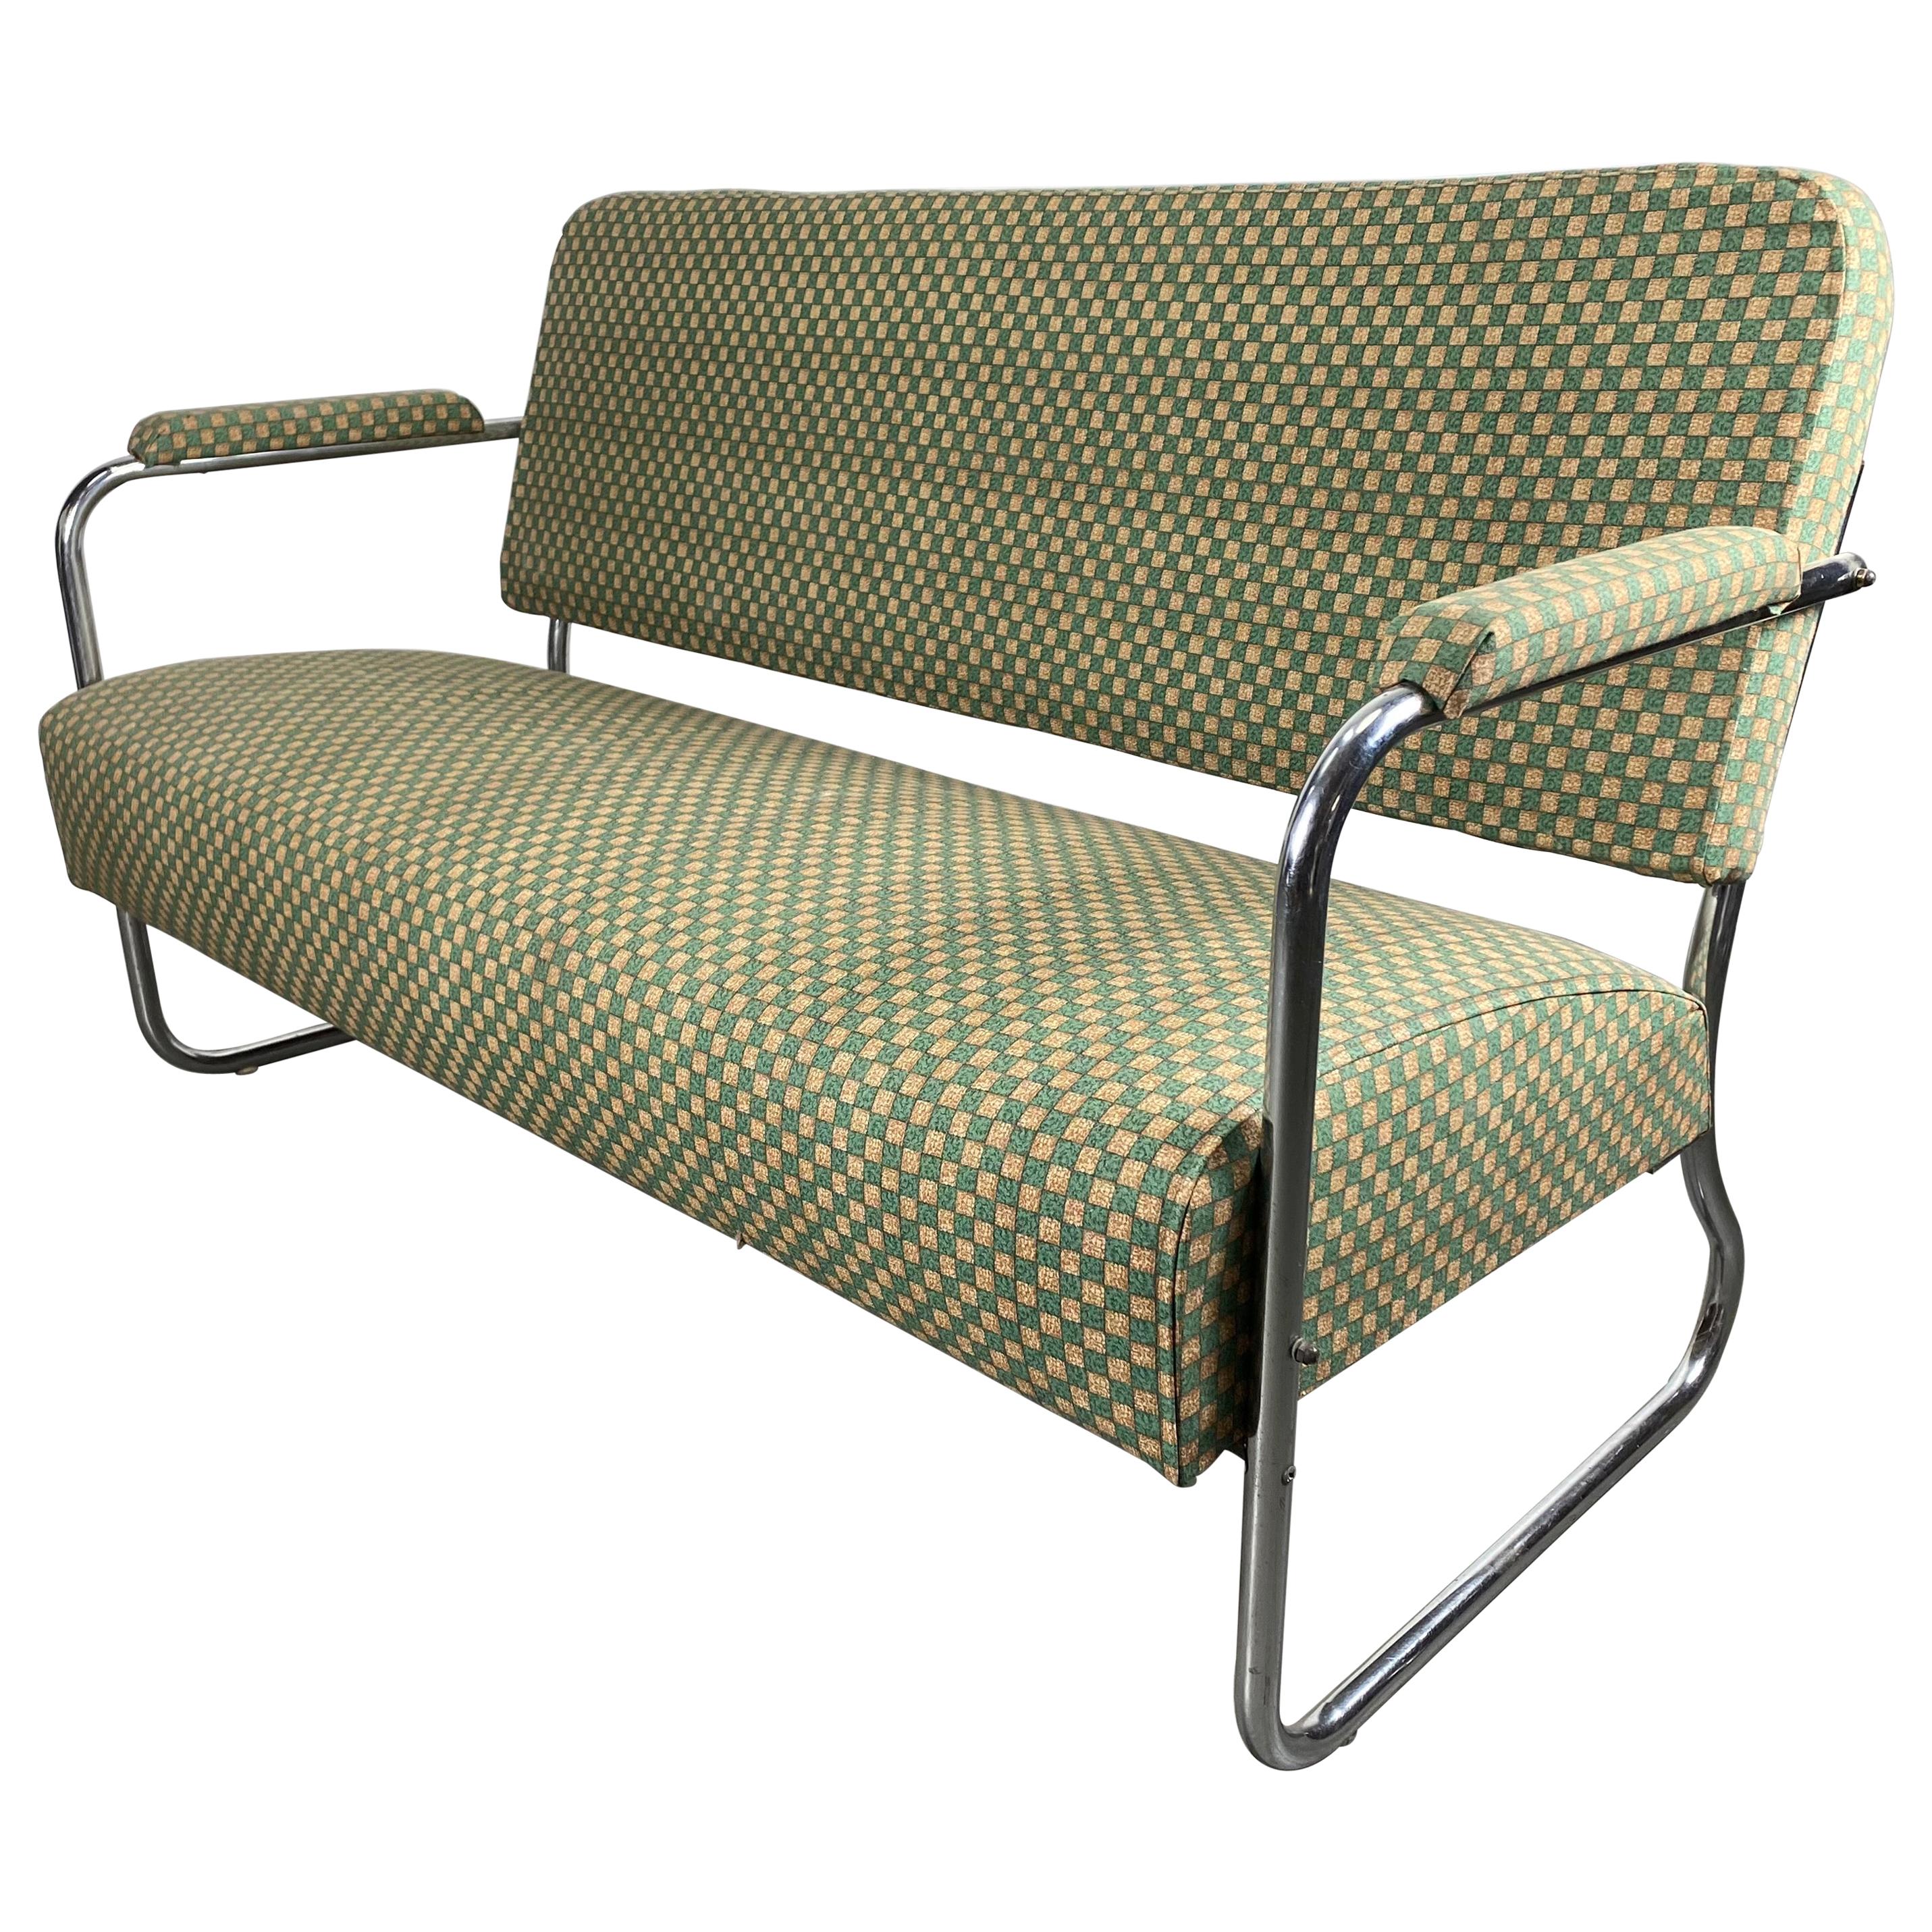 Art Deco / Machine Age Chrome Settee Designed by Gilbert Rohde for Troy Sunshade